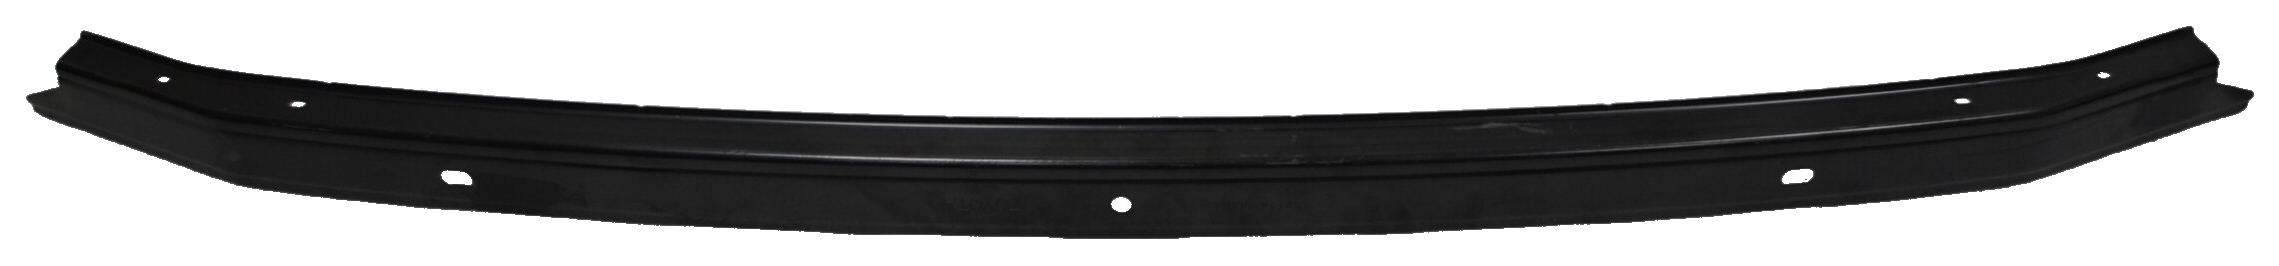 Aftermarket BRACKETS for TOYOTA - TUNDRA, TUNDRA,14-21,Front bumper cover support